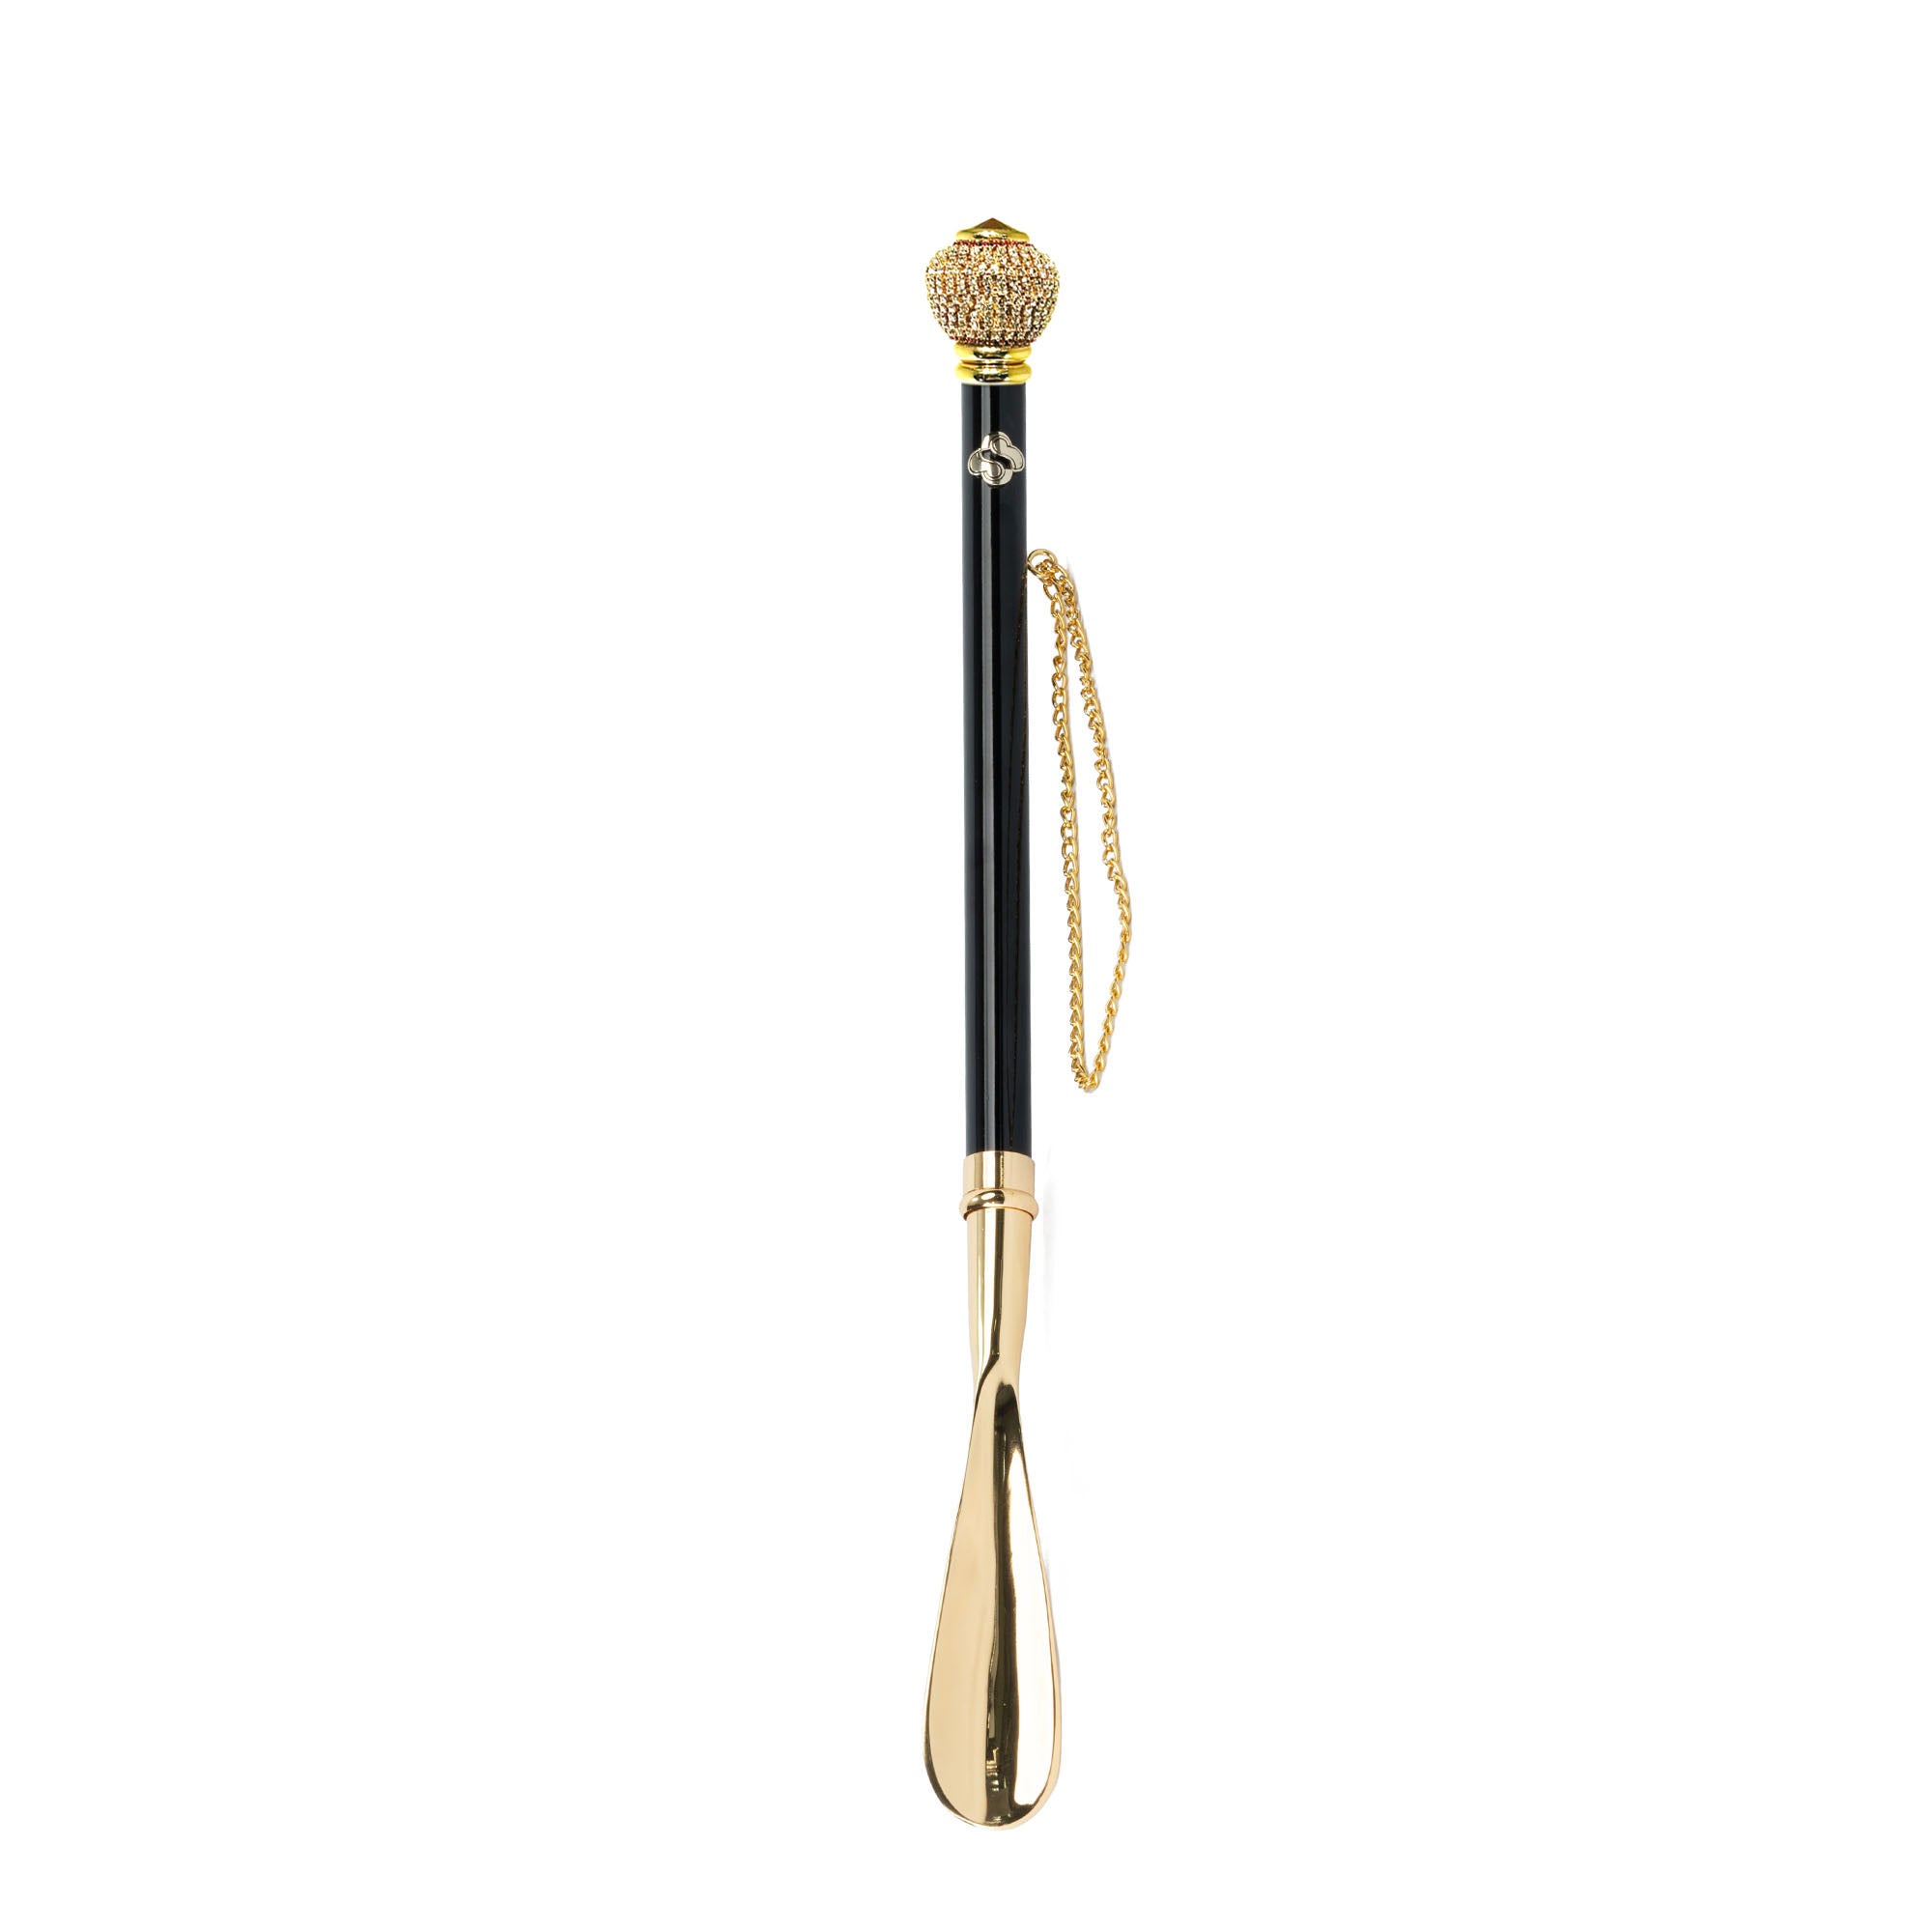 Exquisite Embellishments: 24K Gold-Plated Crystal Shoehorn